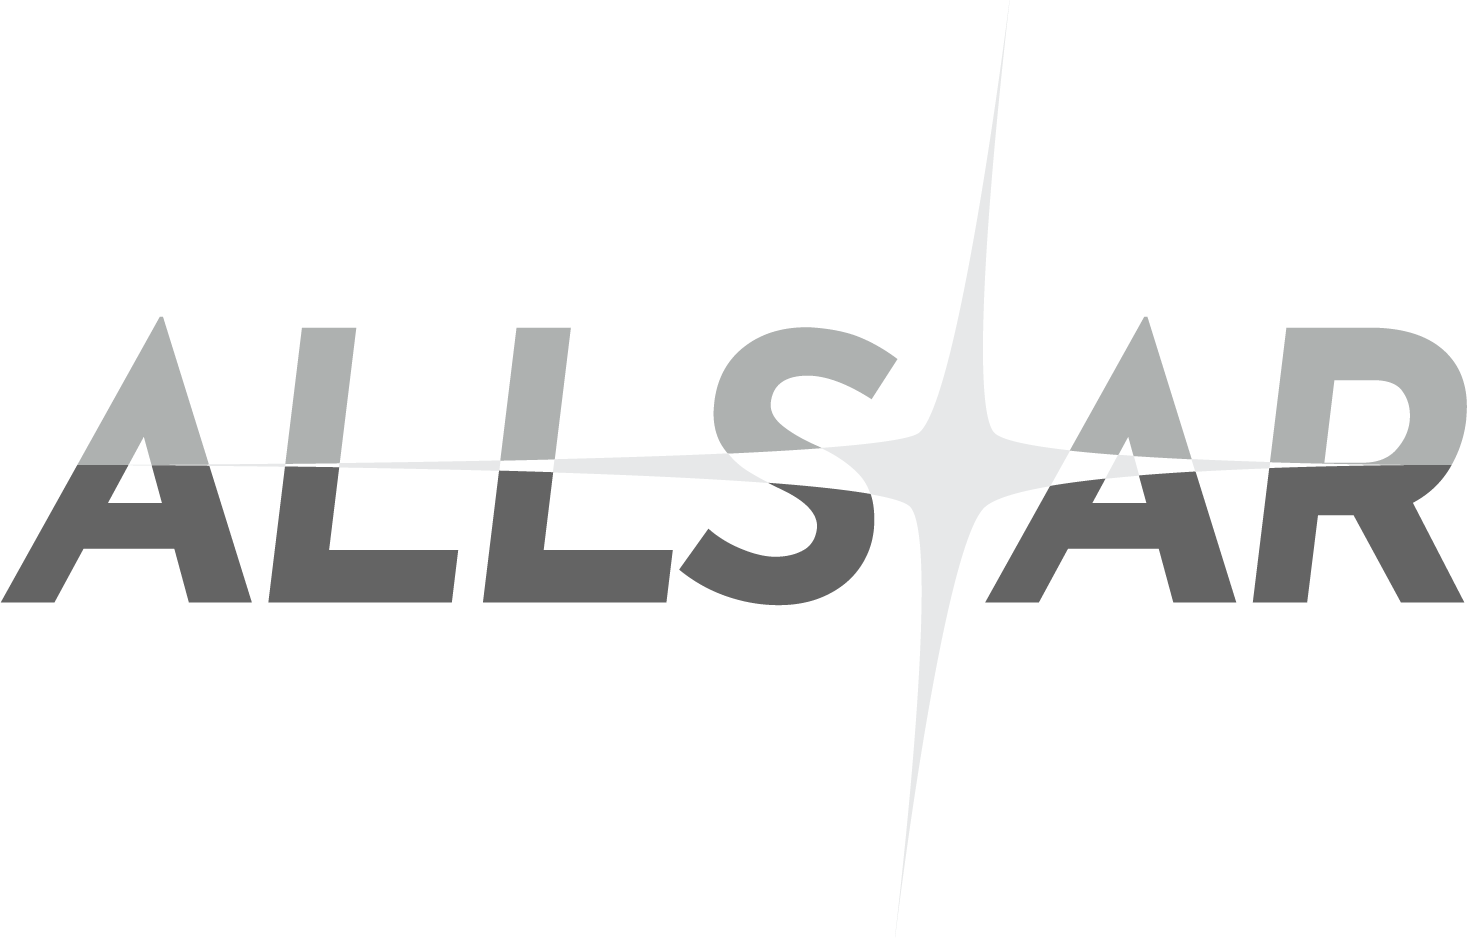 ALLSTAR - Assembled Labeled Library for STatic Analysis Research